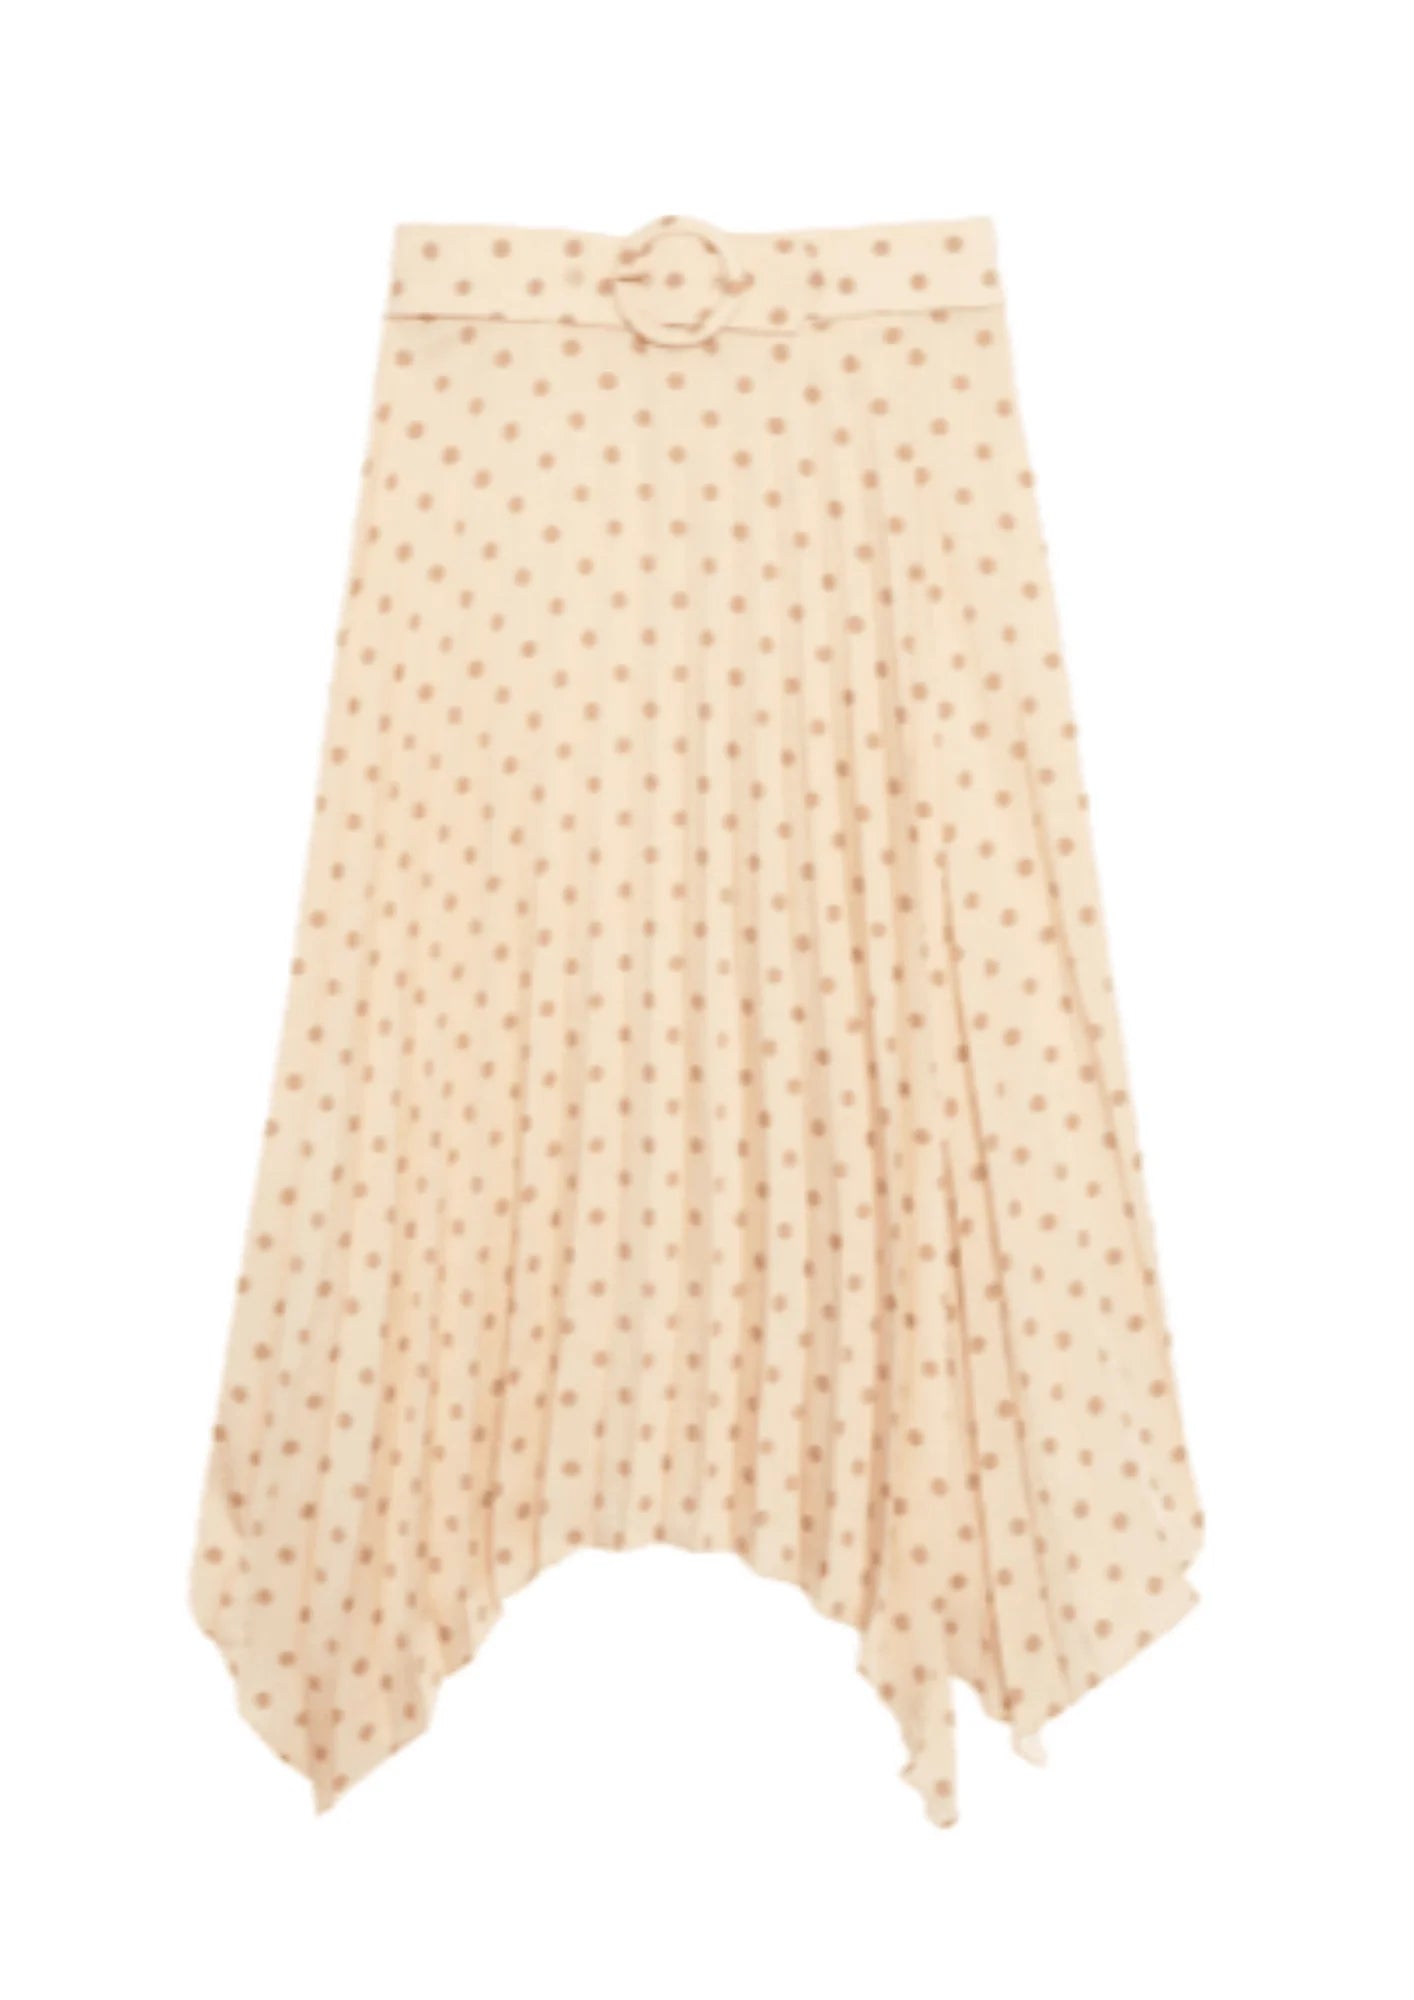 PLEATED SKIRT YELLOW WITH POLKA DOTS